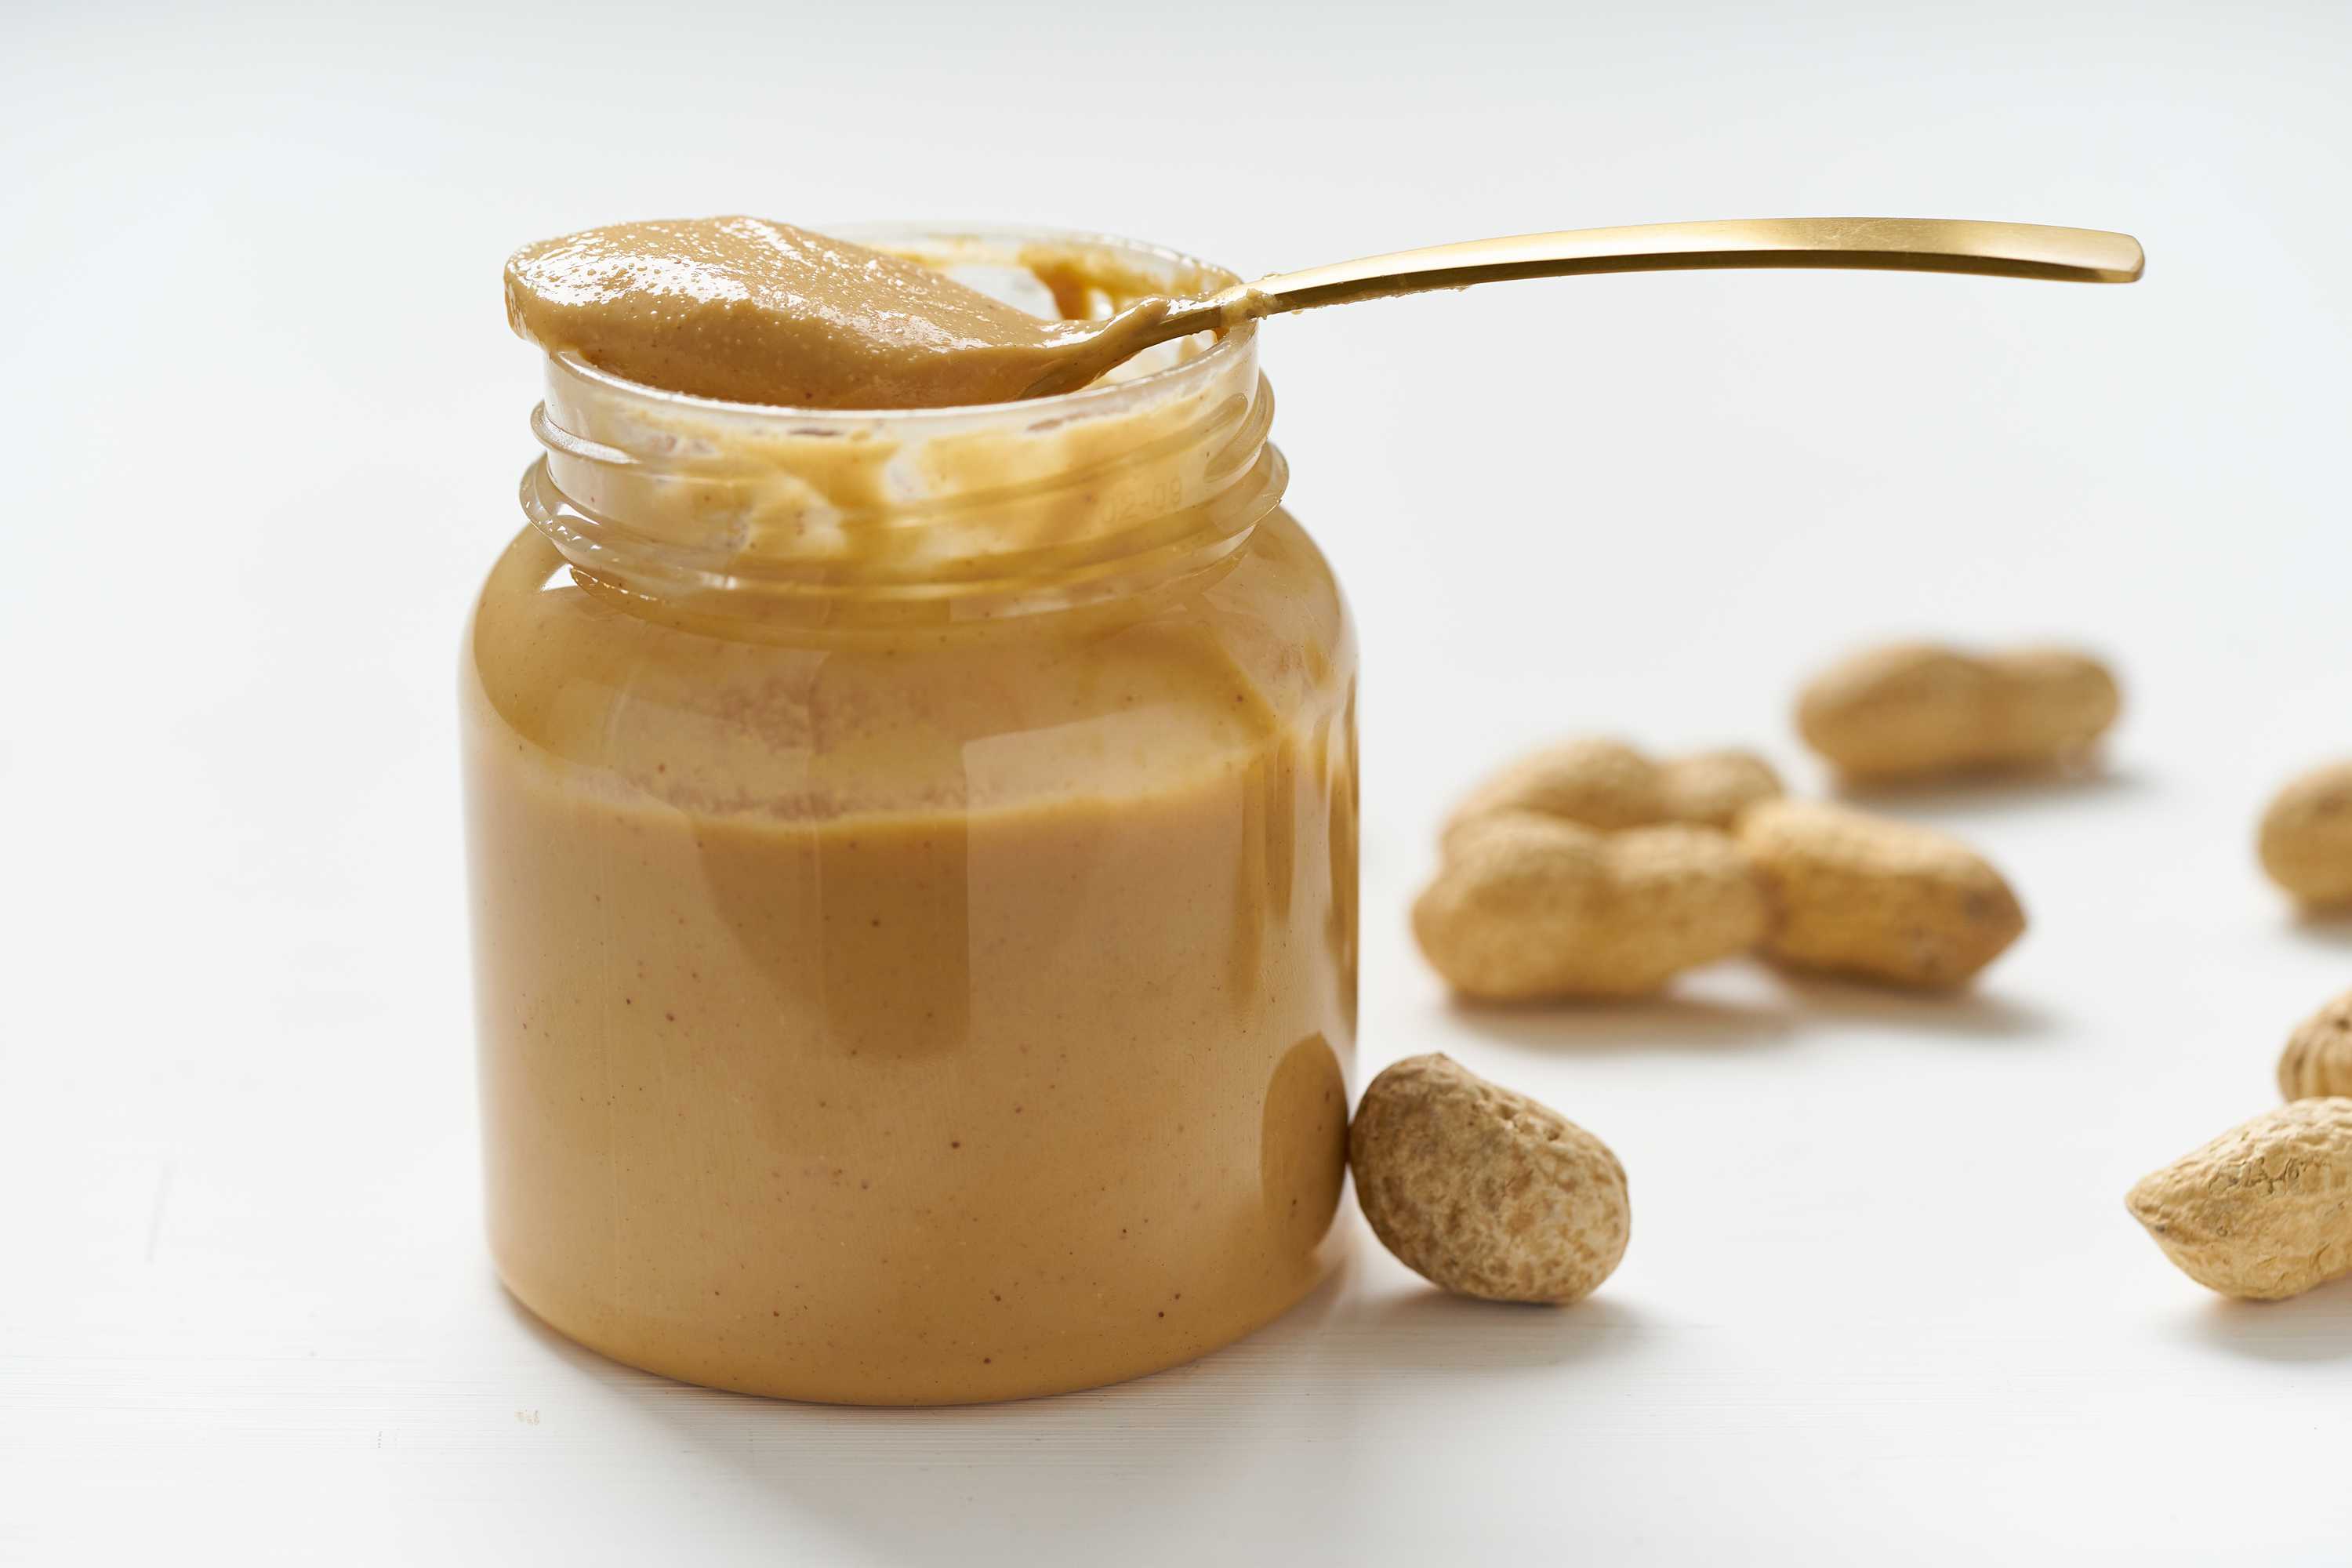 microsoft, can someone with a dysfunctional gallbladder have a serving of peanut butter? a review by nutrition professionals